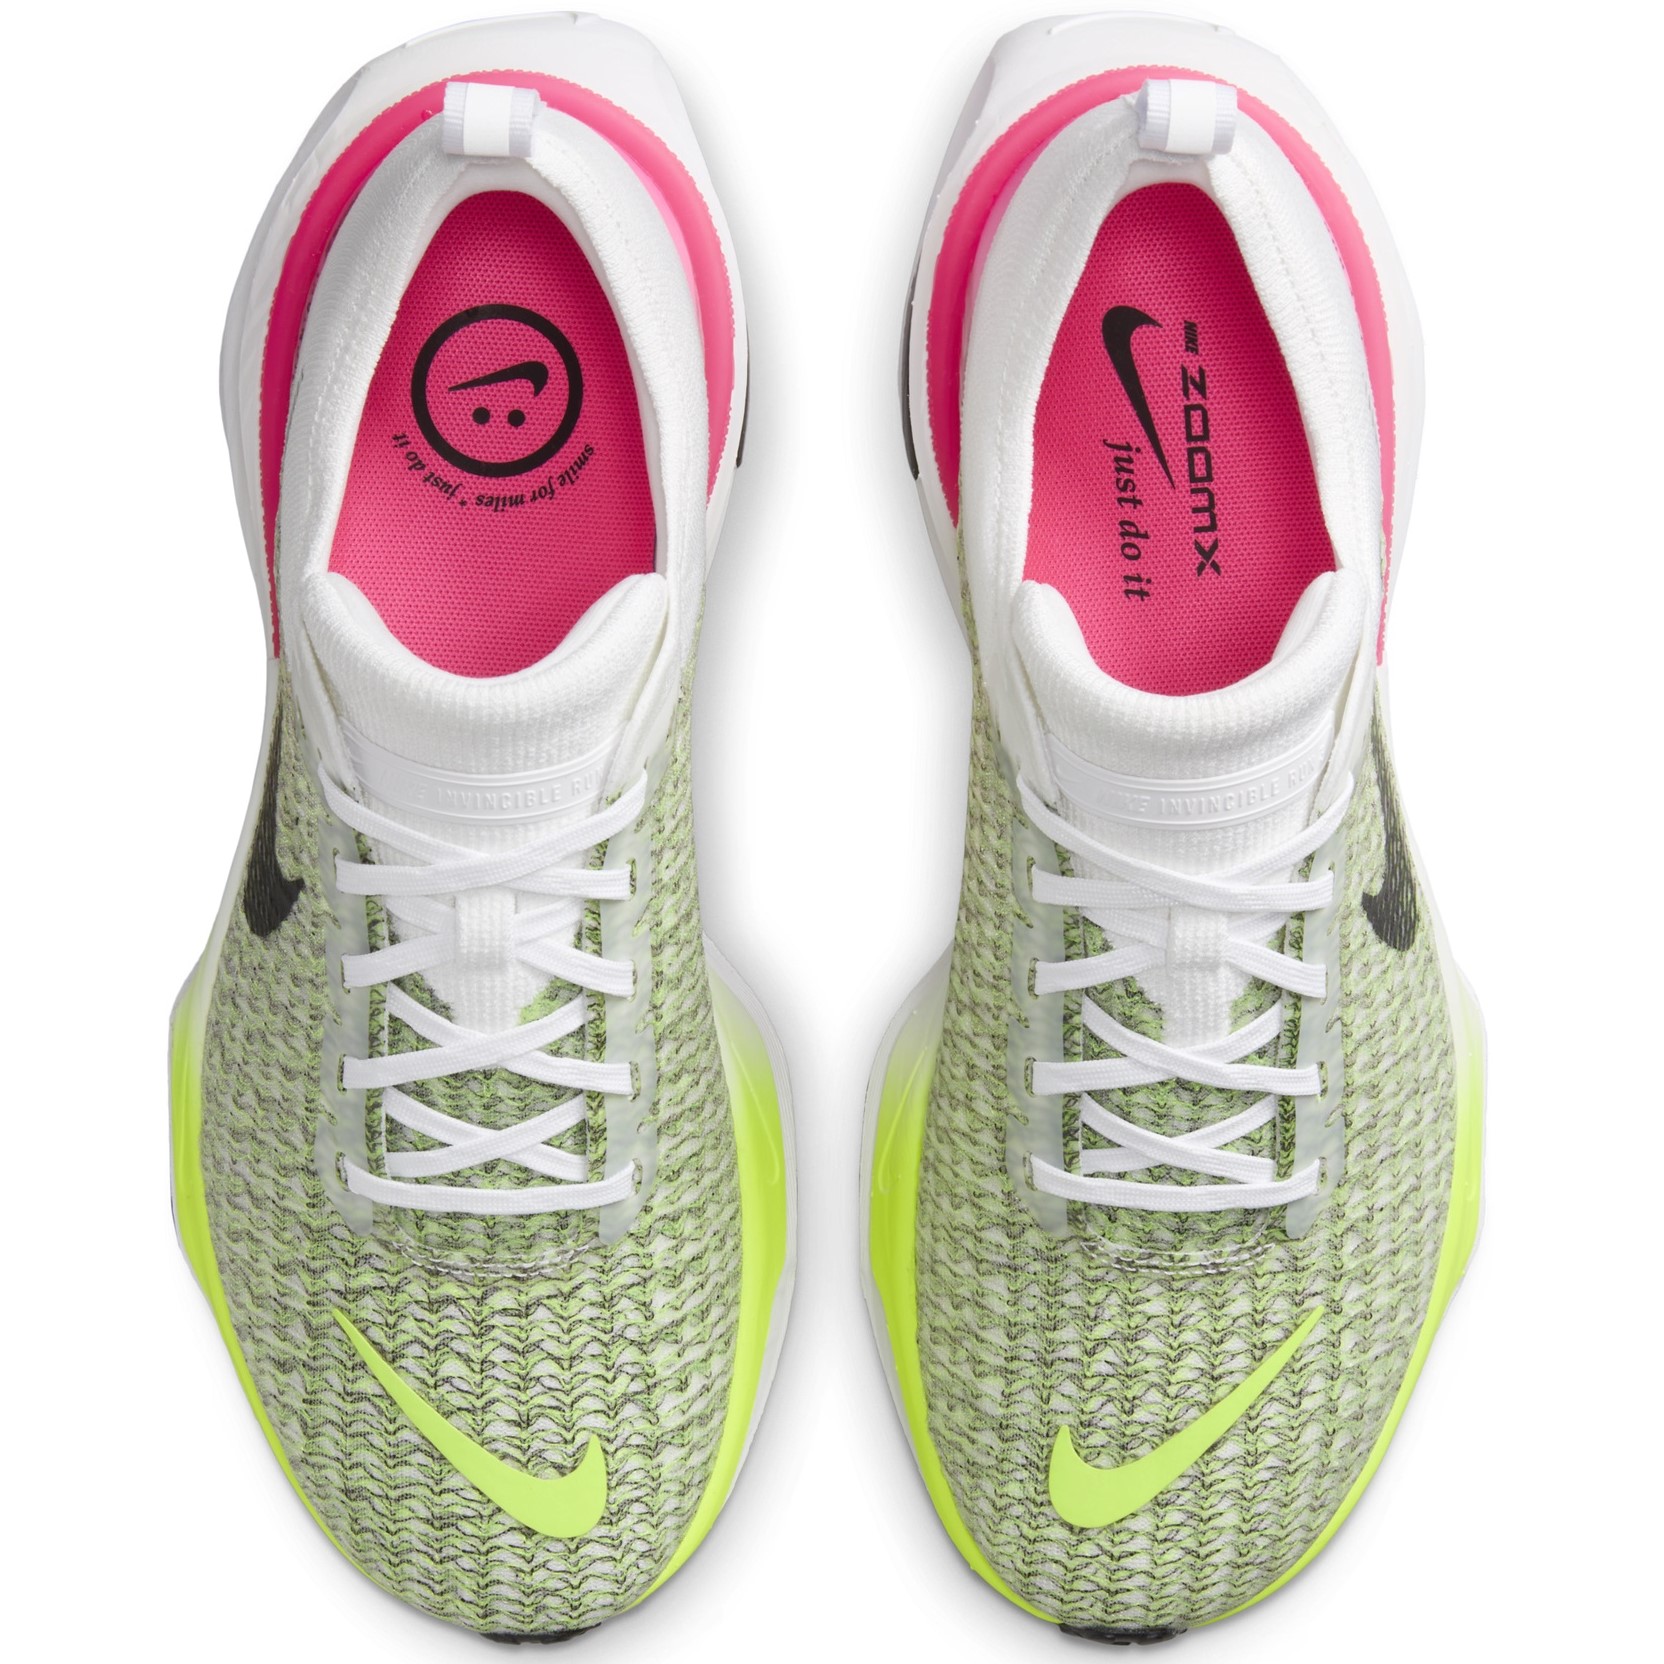 GIÀY CHAY BỘ NIKE NỮ WOMENS ZOOMX INVINCIBLE 3 ROAD RUNNING SHOES WHITE VOLT HYPER PINK FN6821-100 6